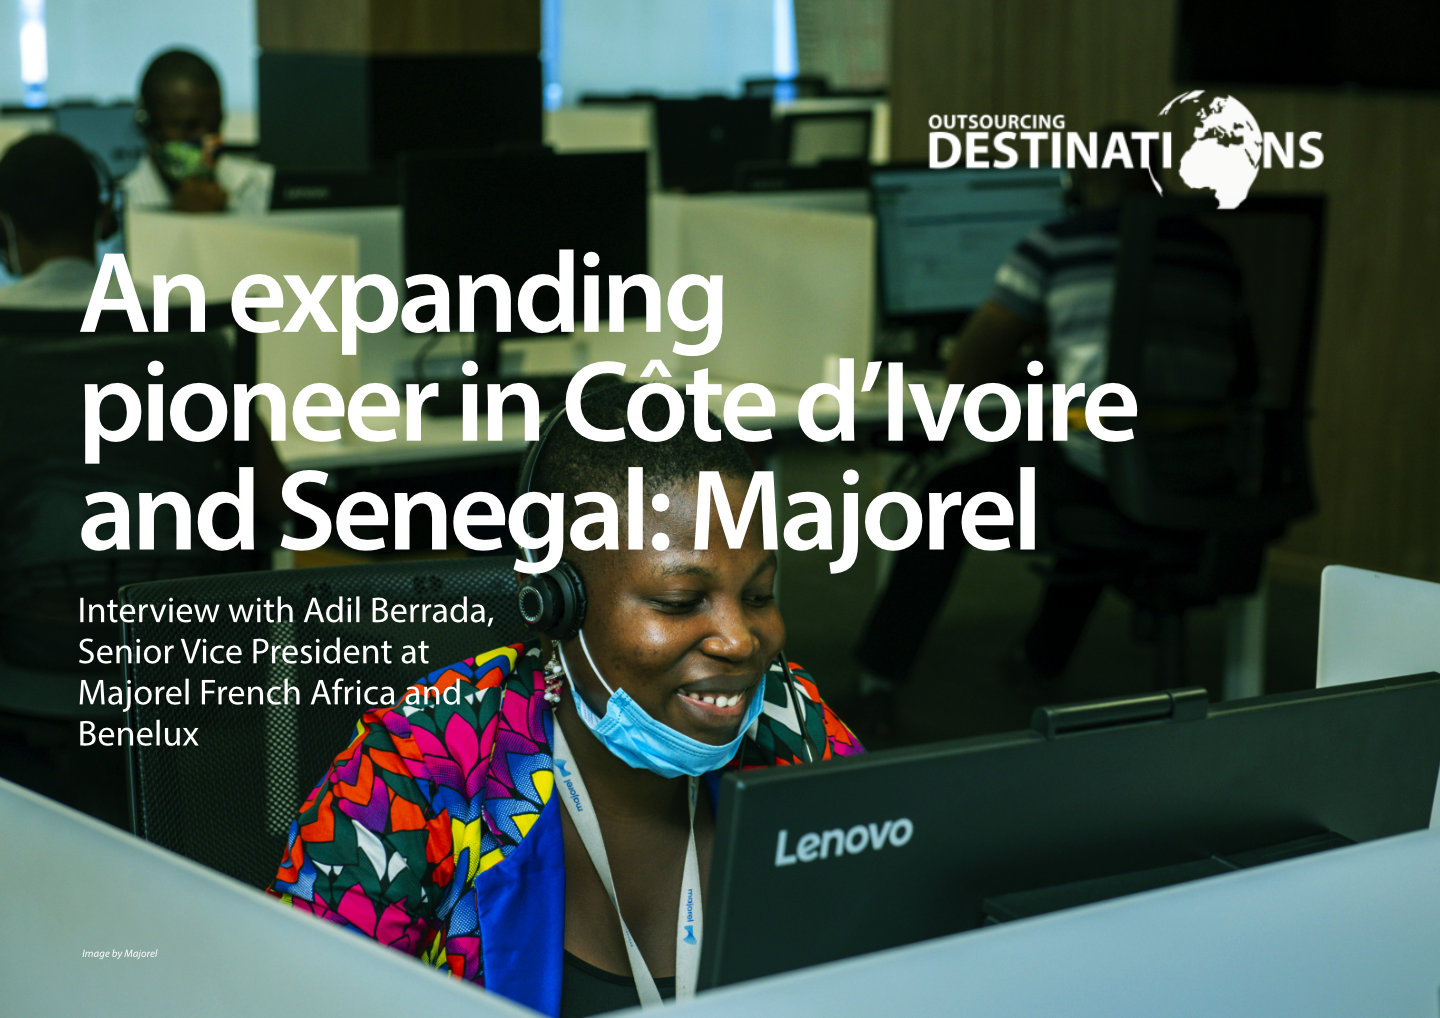 Interview: An expanding pioneer in Côted’Ivoire and Senegal – Majorel